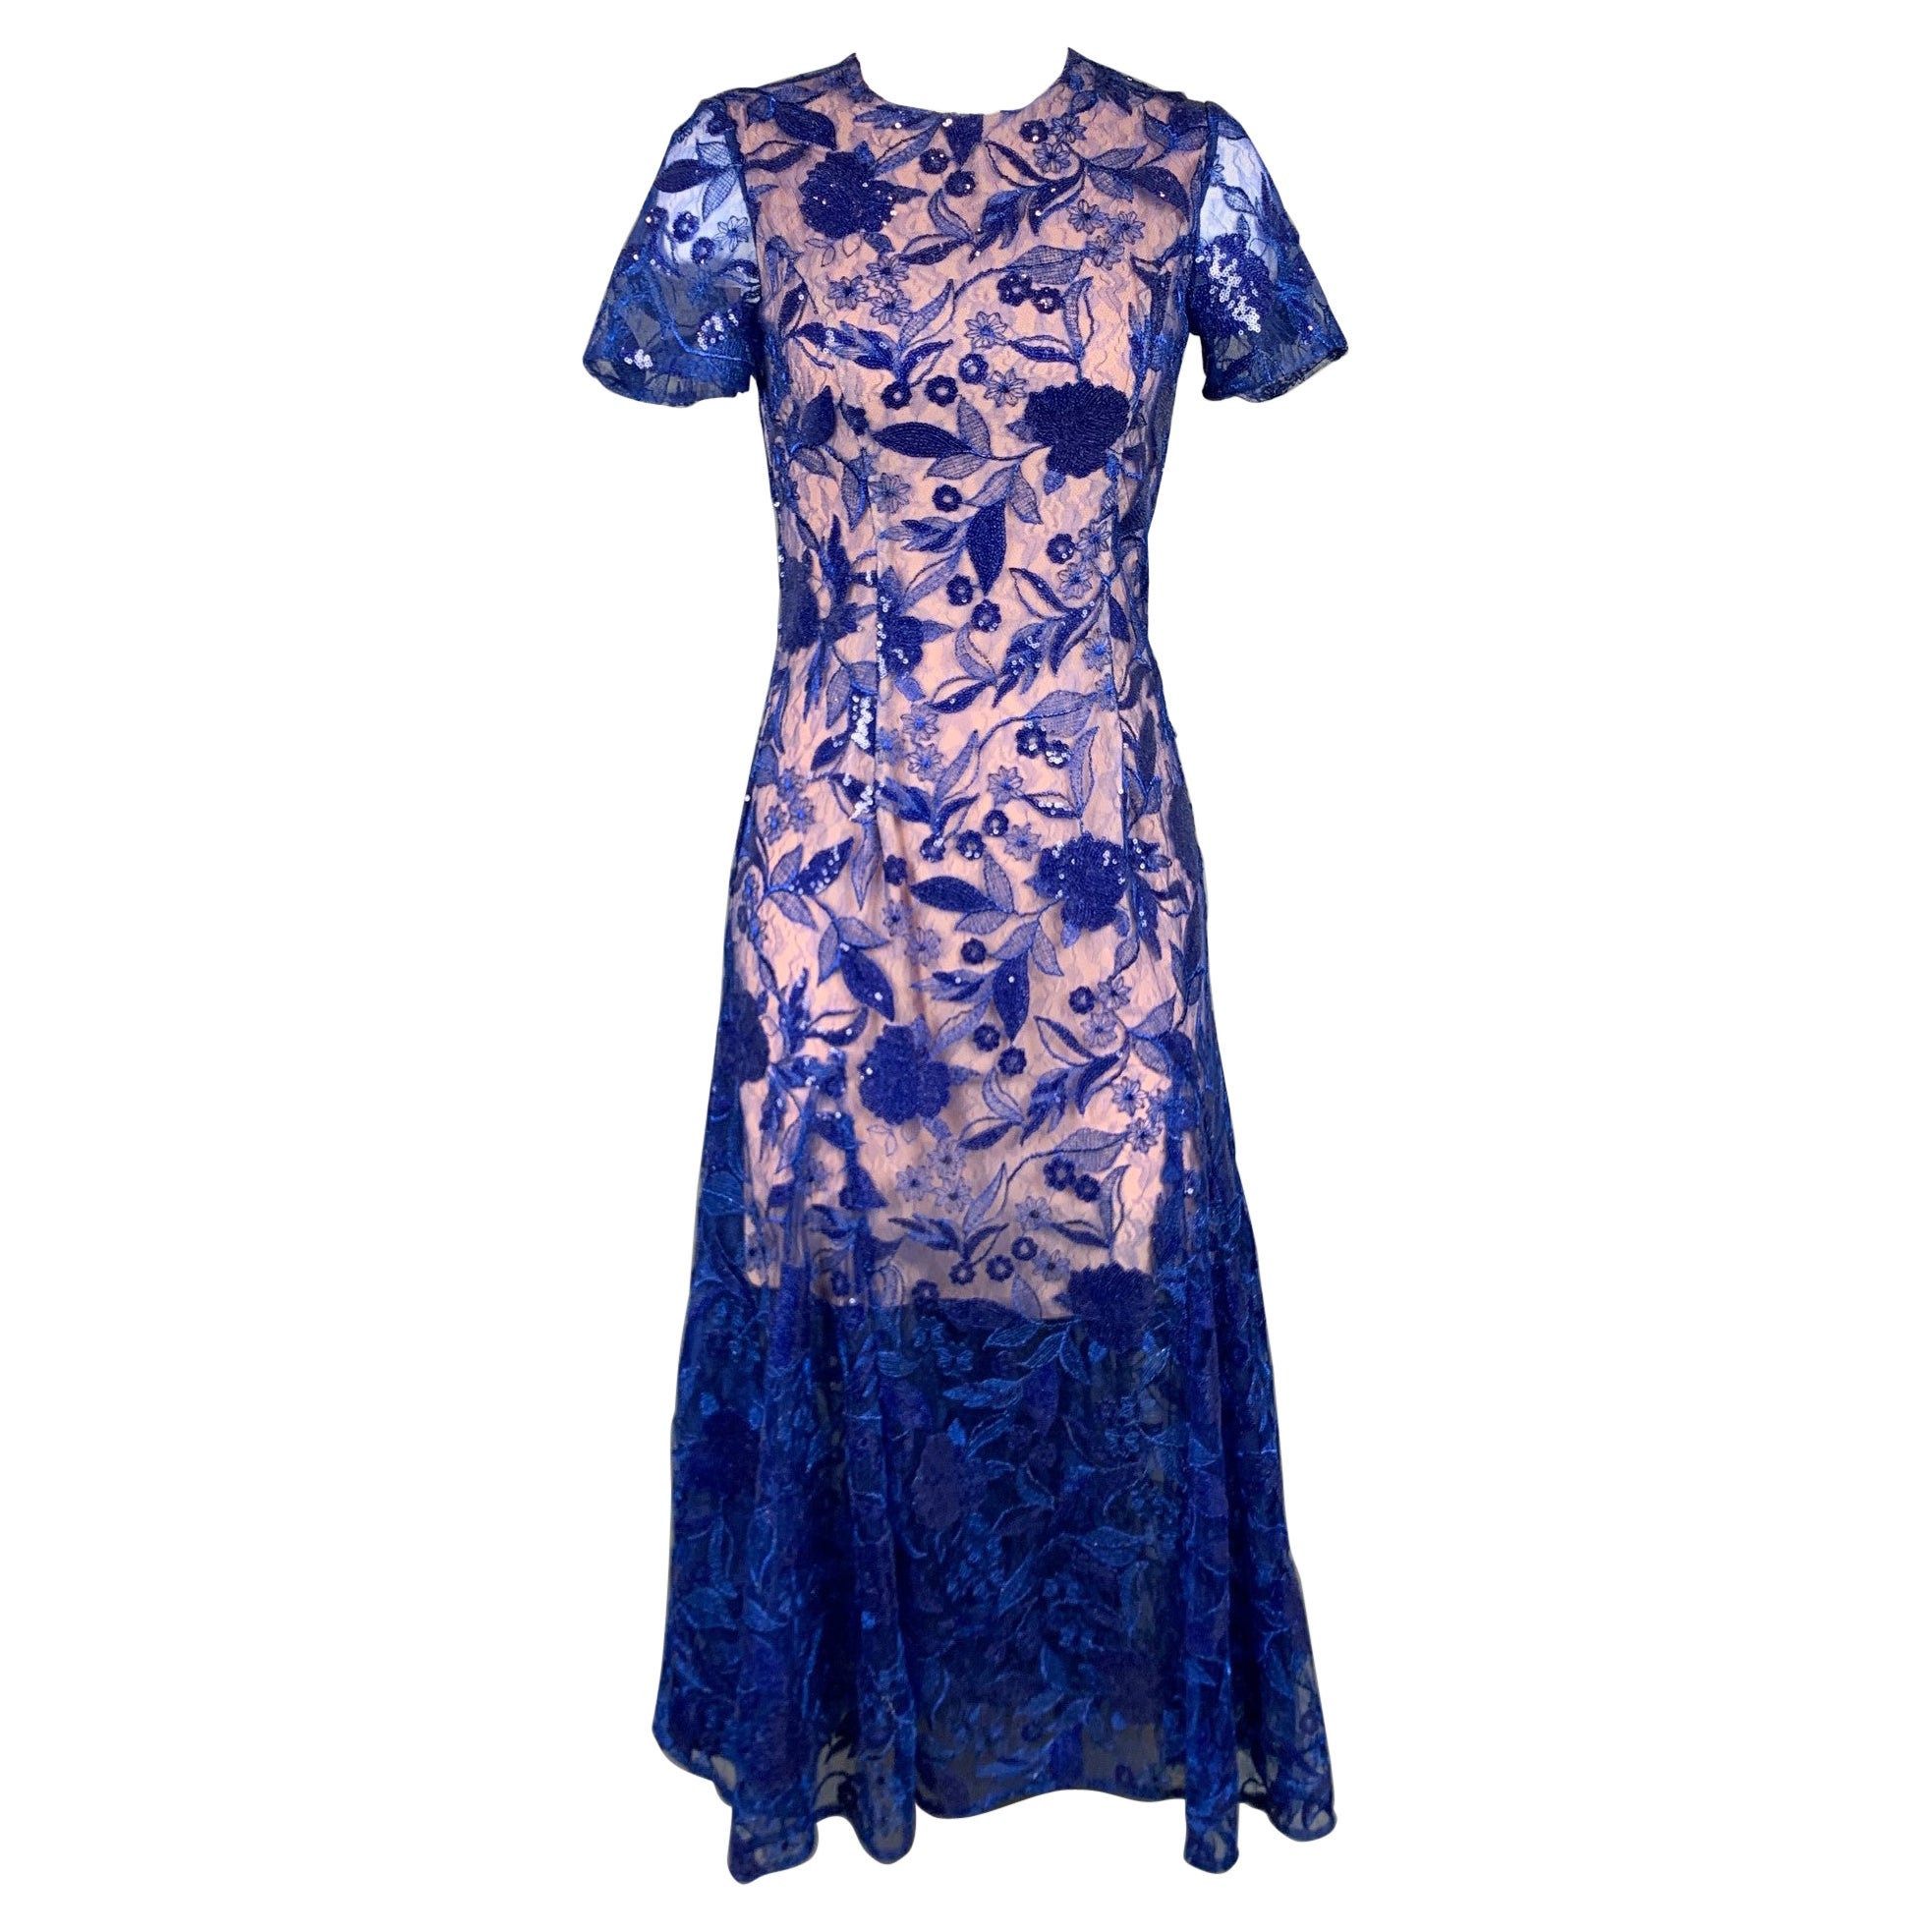 COSTARELLOS Size 4 Blue & Nude Sequin Embroidered Polyester / Nylon Dress